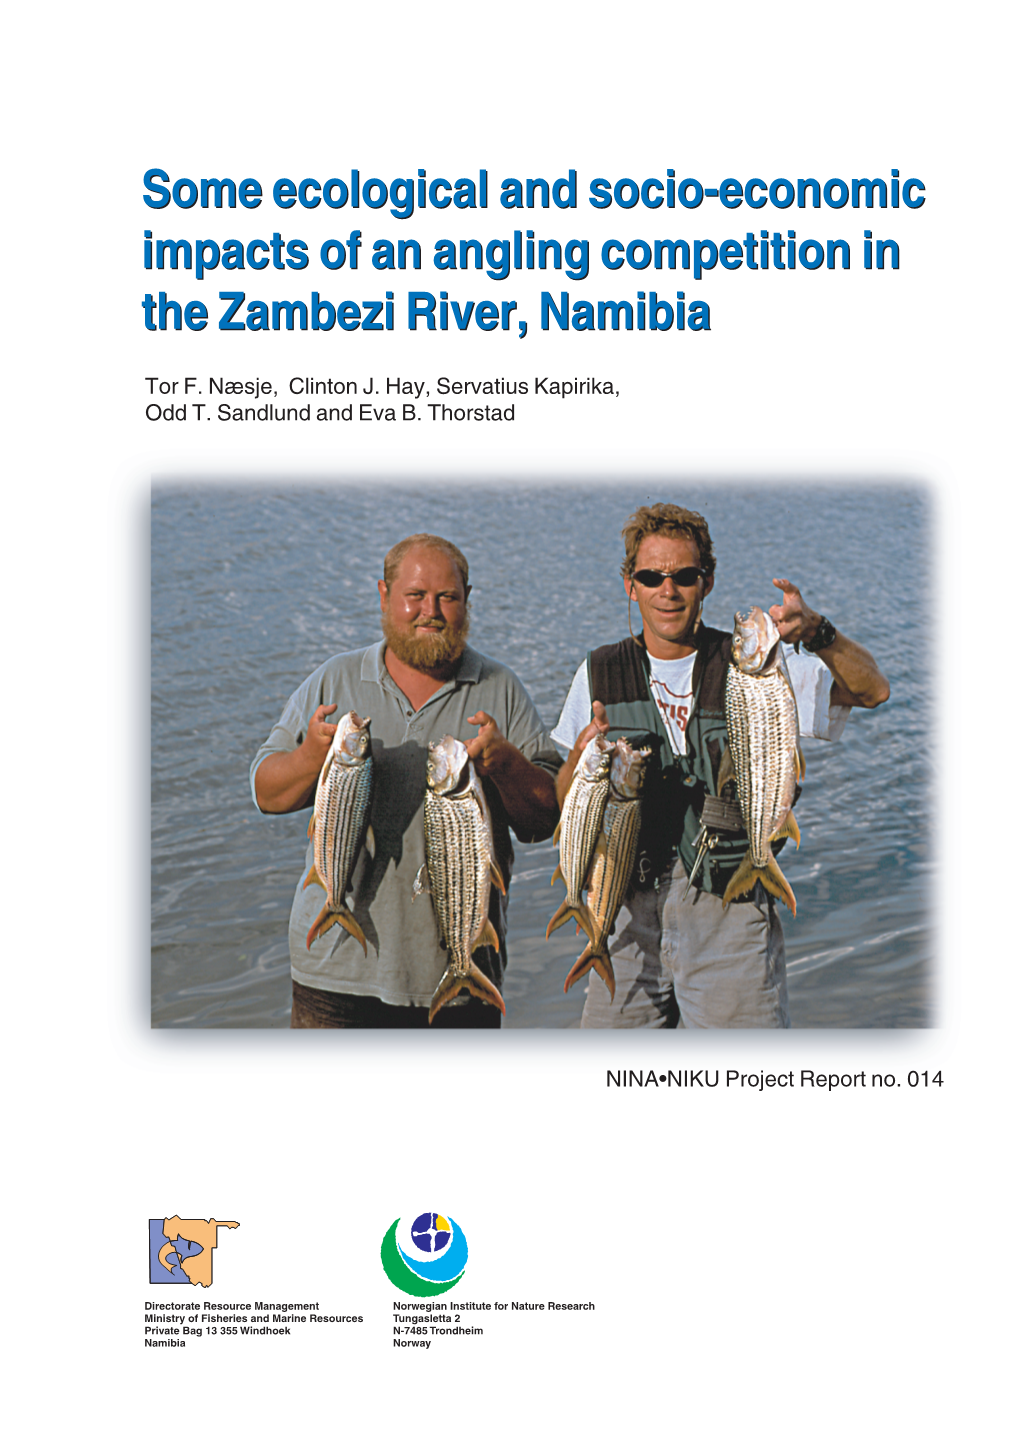 Some Ecological and Socio-Economic Impacts of an Angling Competition in the Zambezi River, Namibia